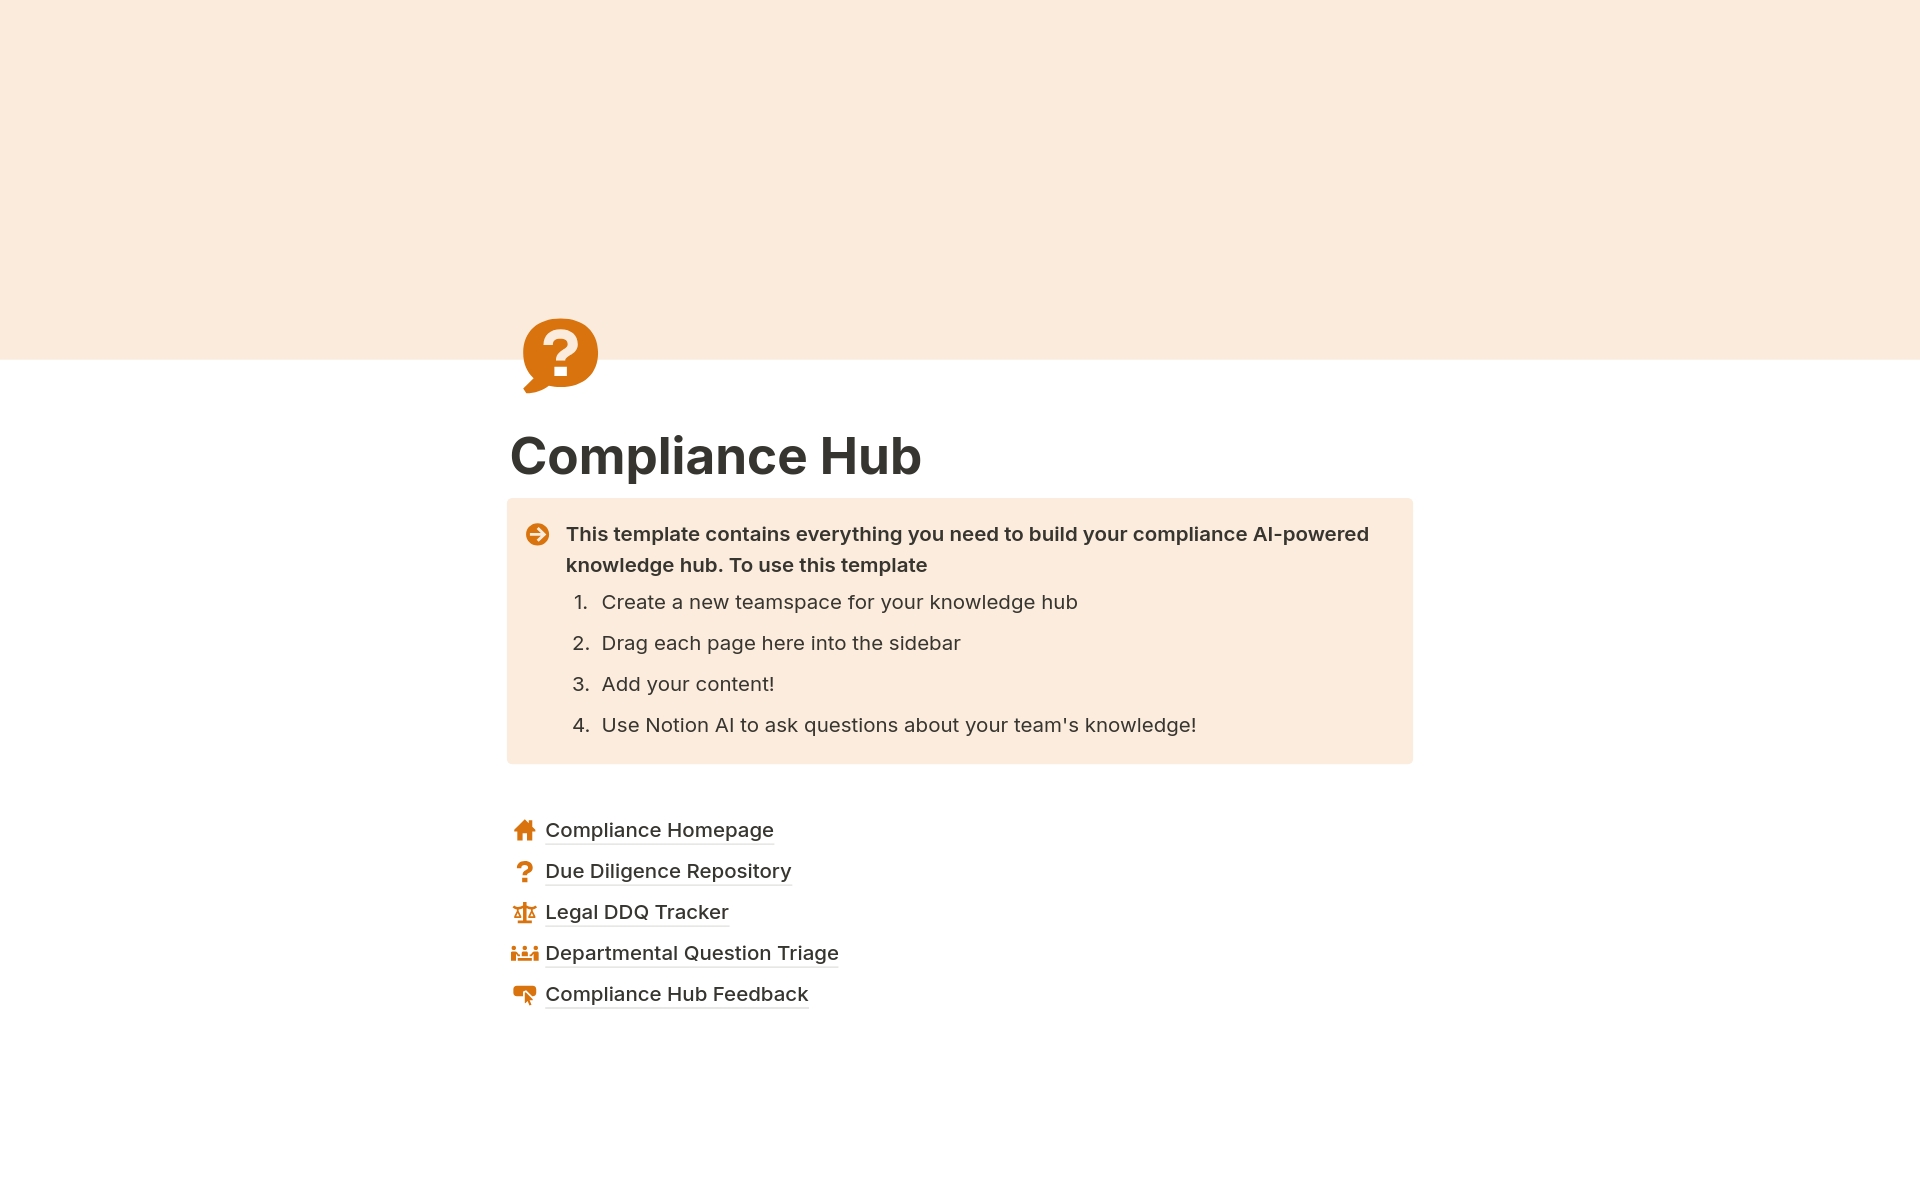 Ensure your team stays compliant with this AI-powered Compliance Hub template, designed to streamline legal and regulatory processes.